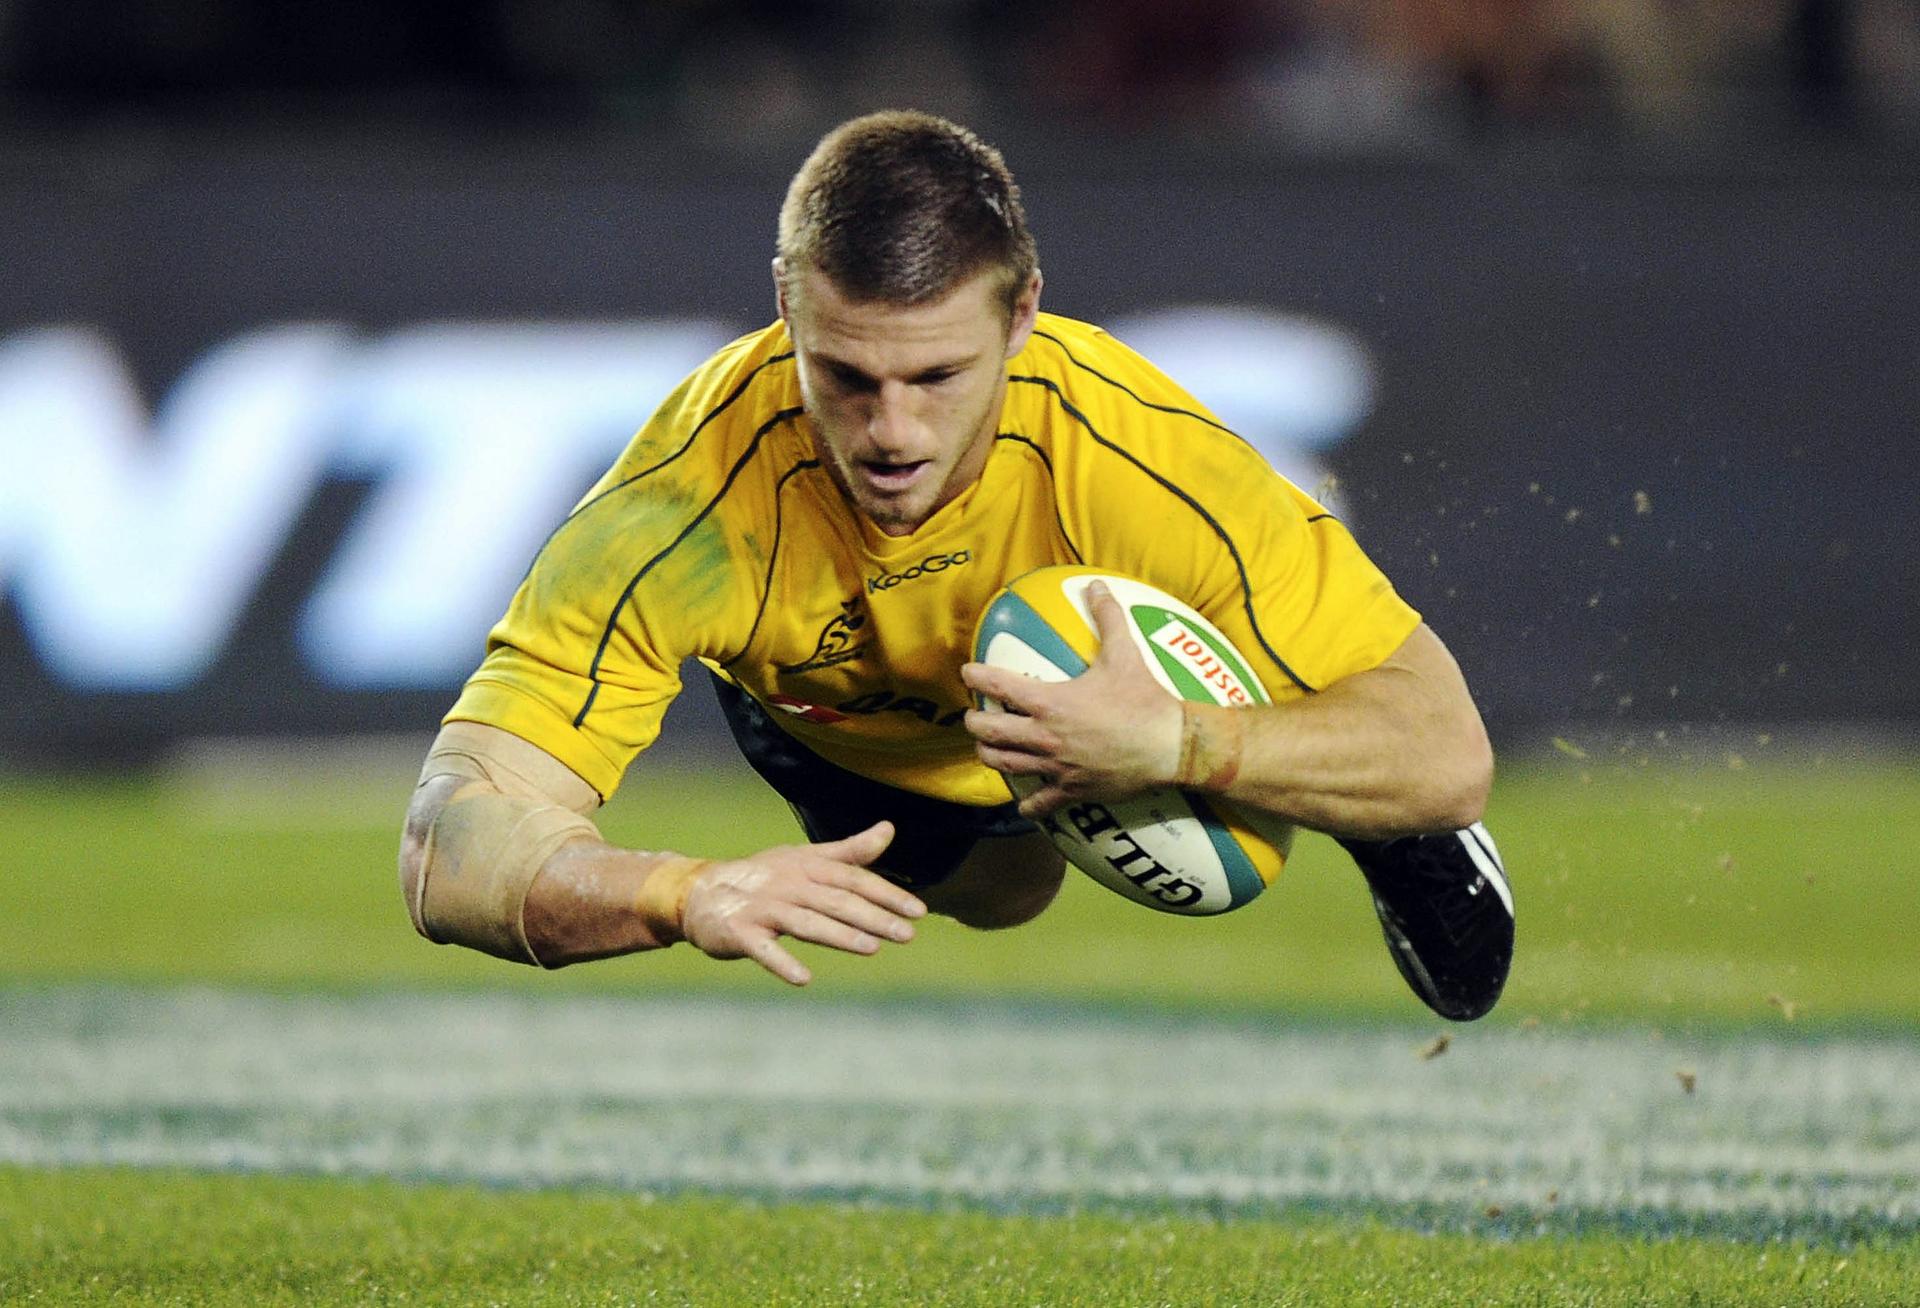 Wallaby Rob Horne scored two tries for the Waratahs on Sunday. Photo: Reuters